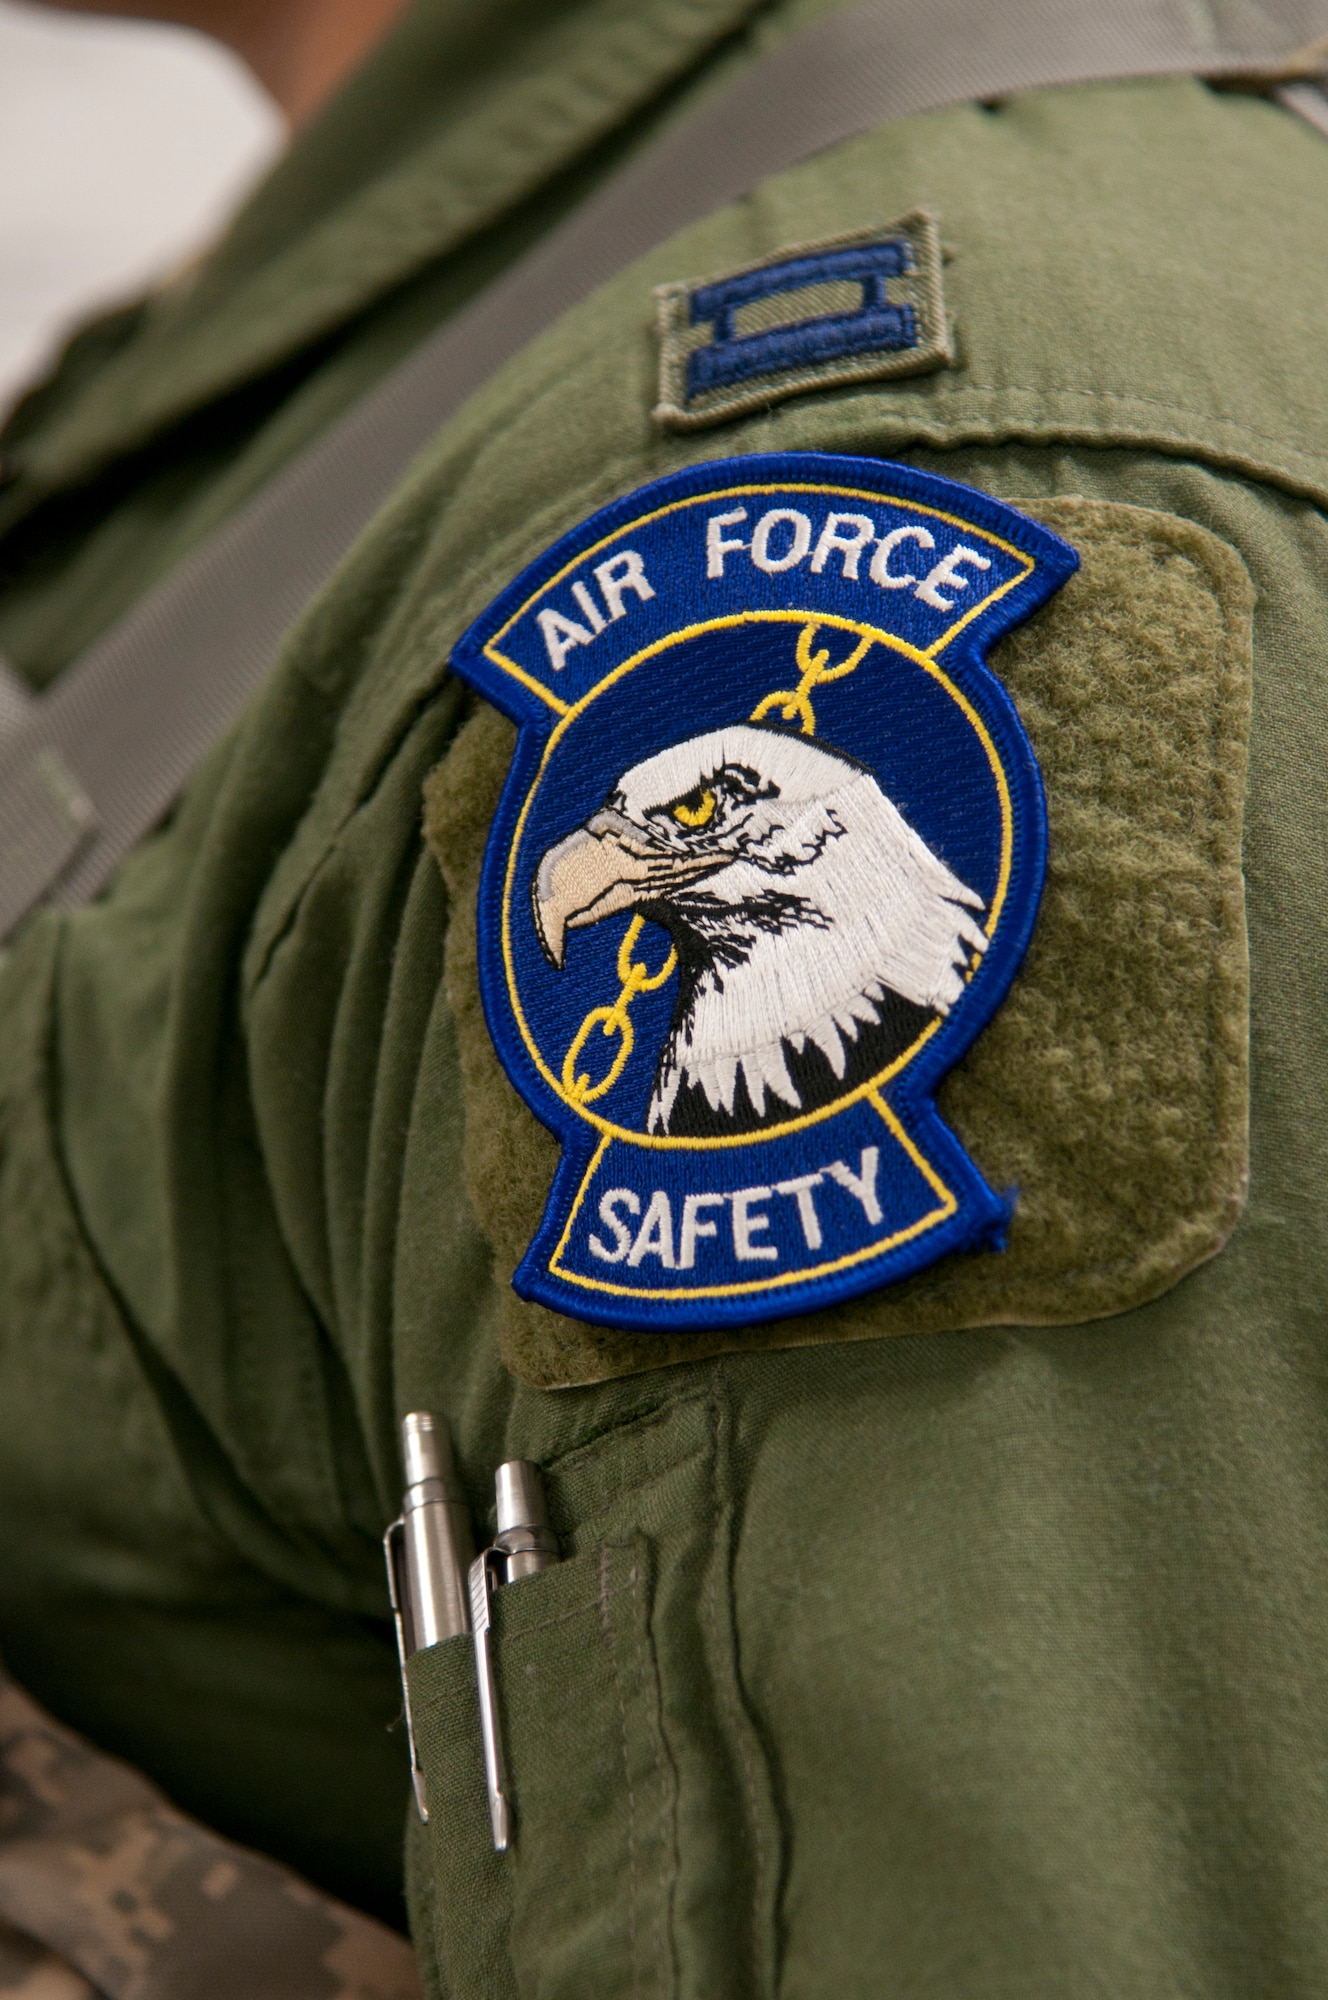 Capt. Michael Carter, 582nd Helicopter Group flight safety officer, wears the Air Force Safety showing his connection and duty to keeping his fellow Airmen protected. It is the responsibility of Air Force flight safety officers to provide the proper tools and information to ensure the safety of aircrews. (U.S. Air Force photo by Airman 1st Class Malcolm Mayfield)